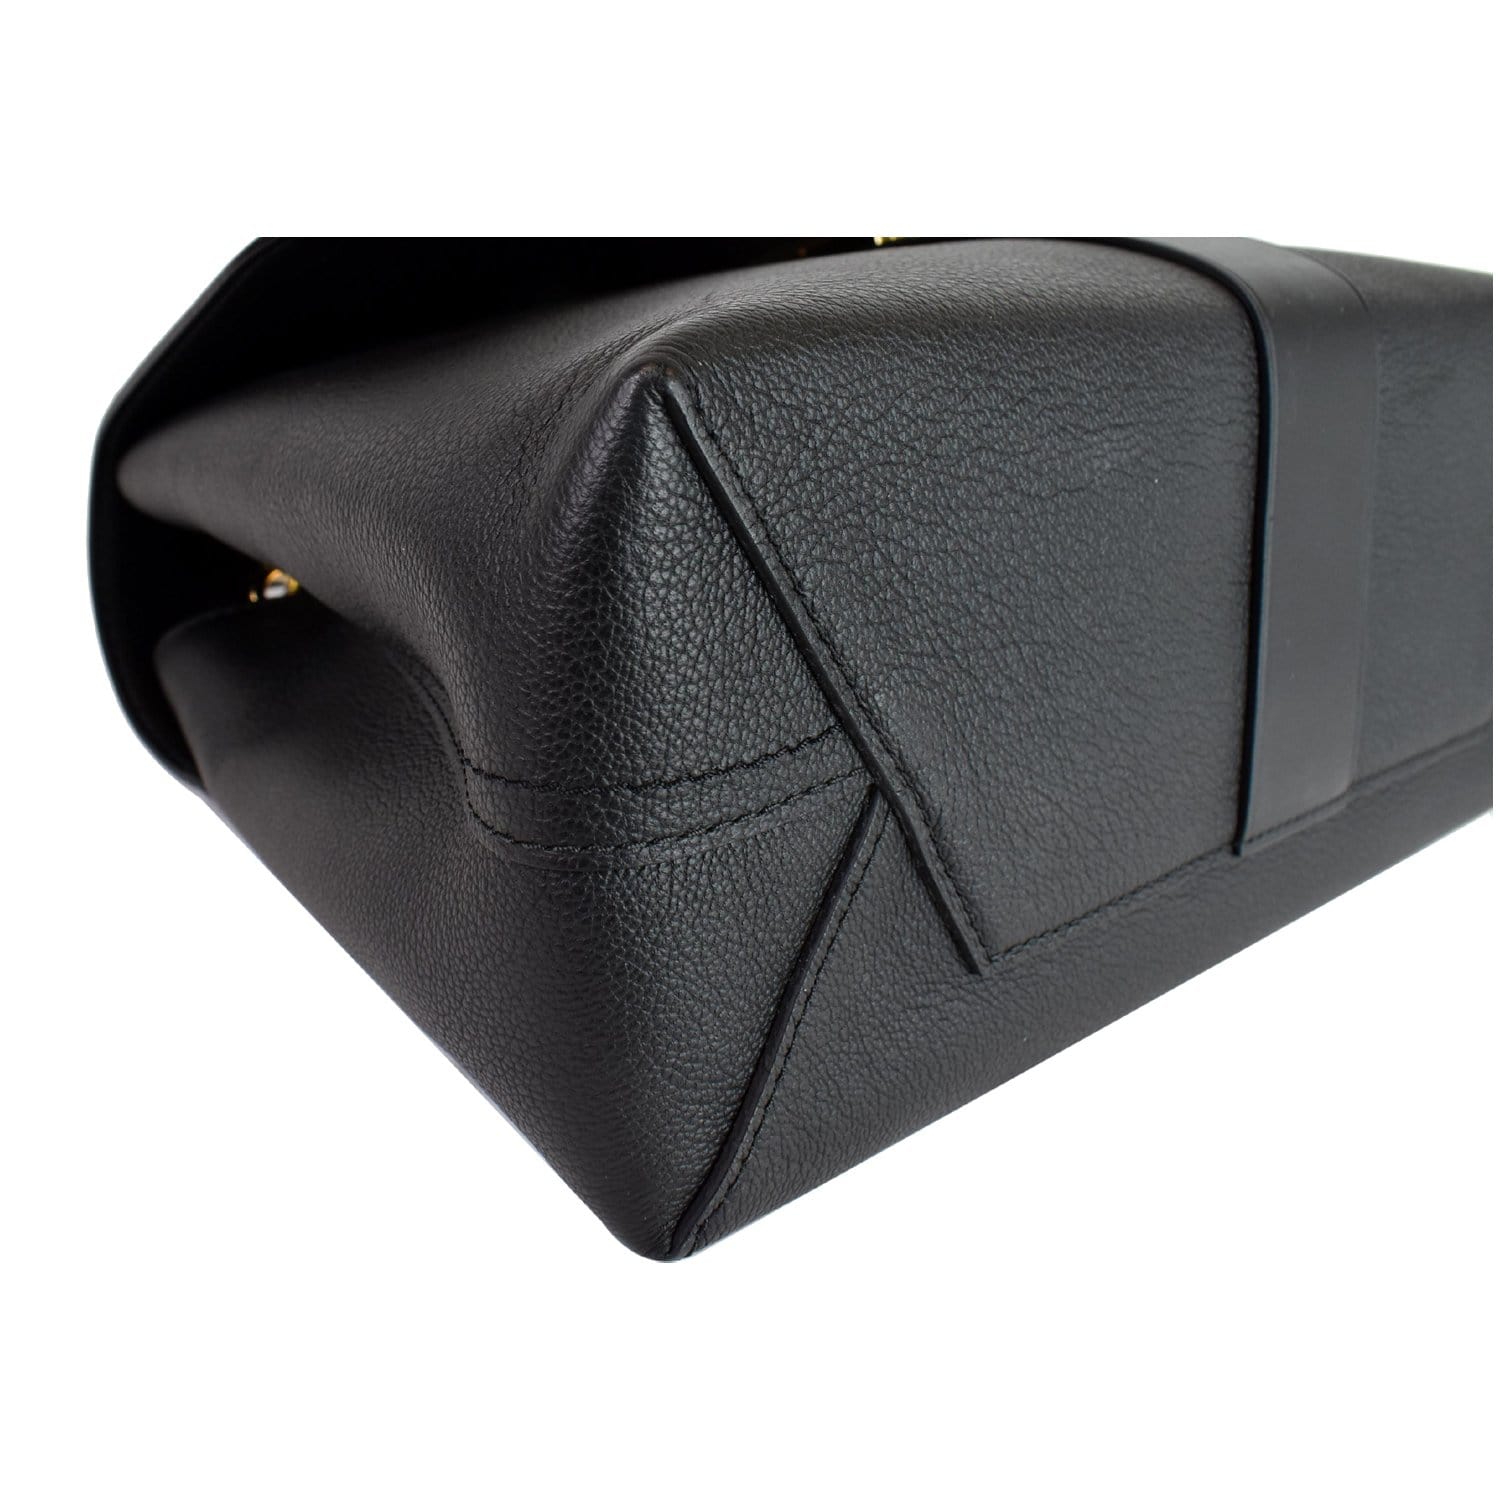 Leather Replacement Top Handle in Black for Designer Bags and LV NeoNoe (  ¾” Wide - 11.4” long)